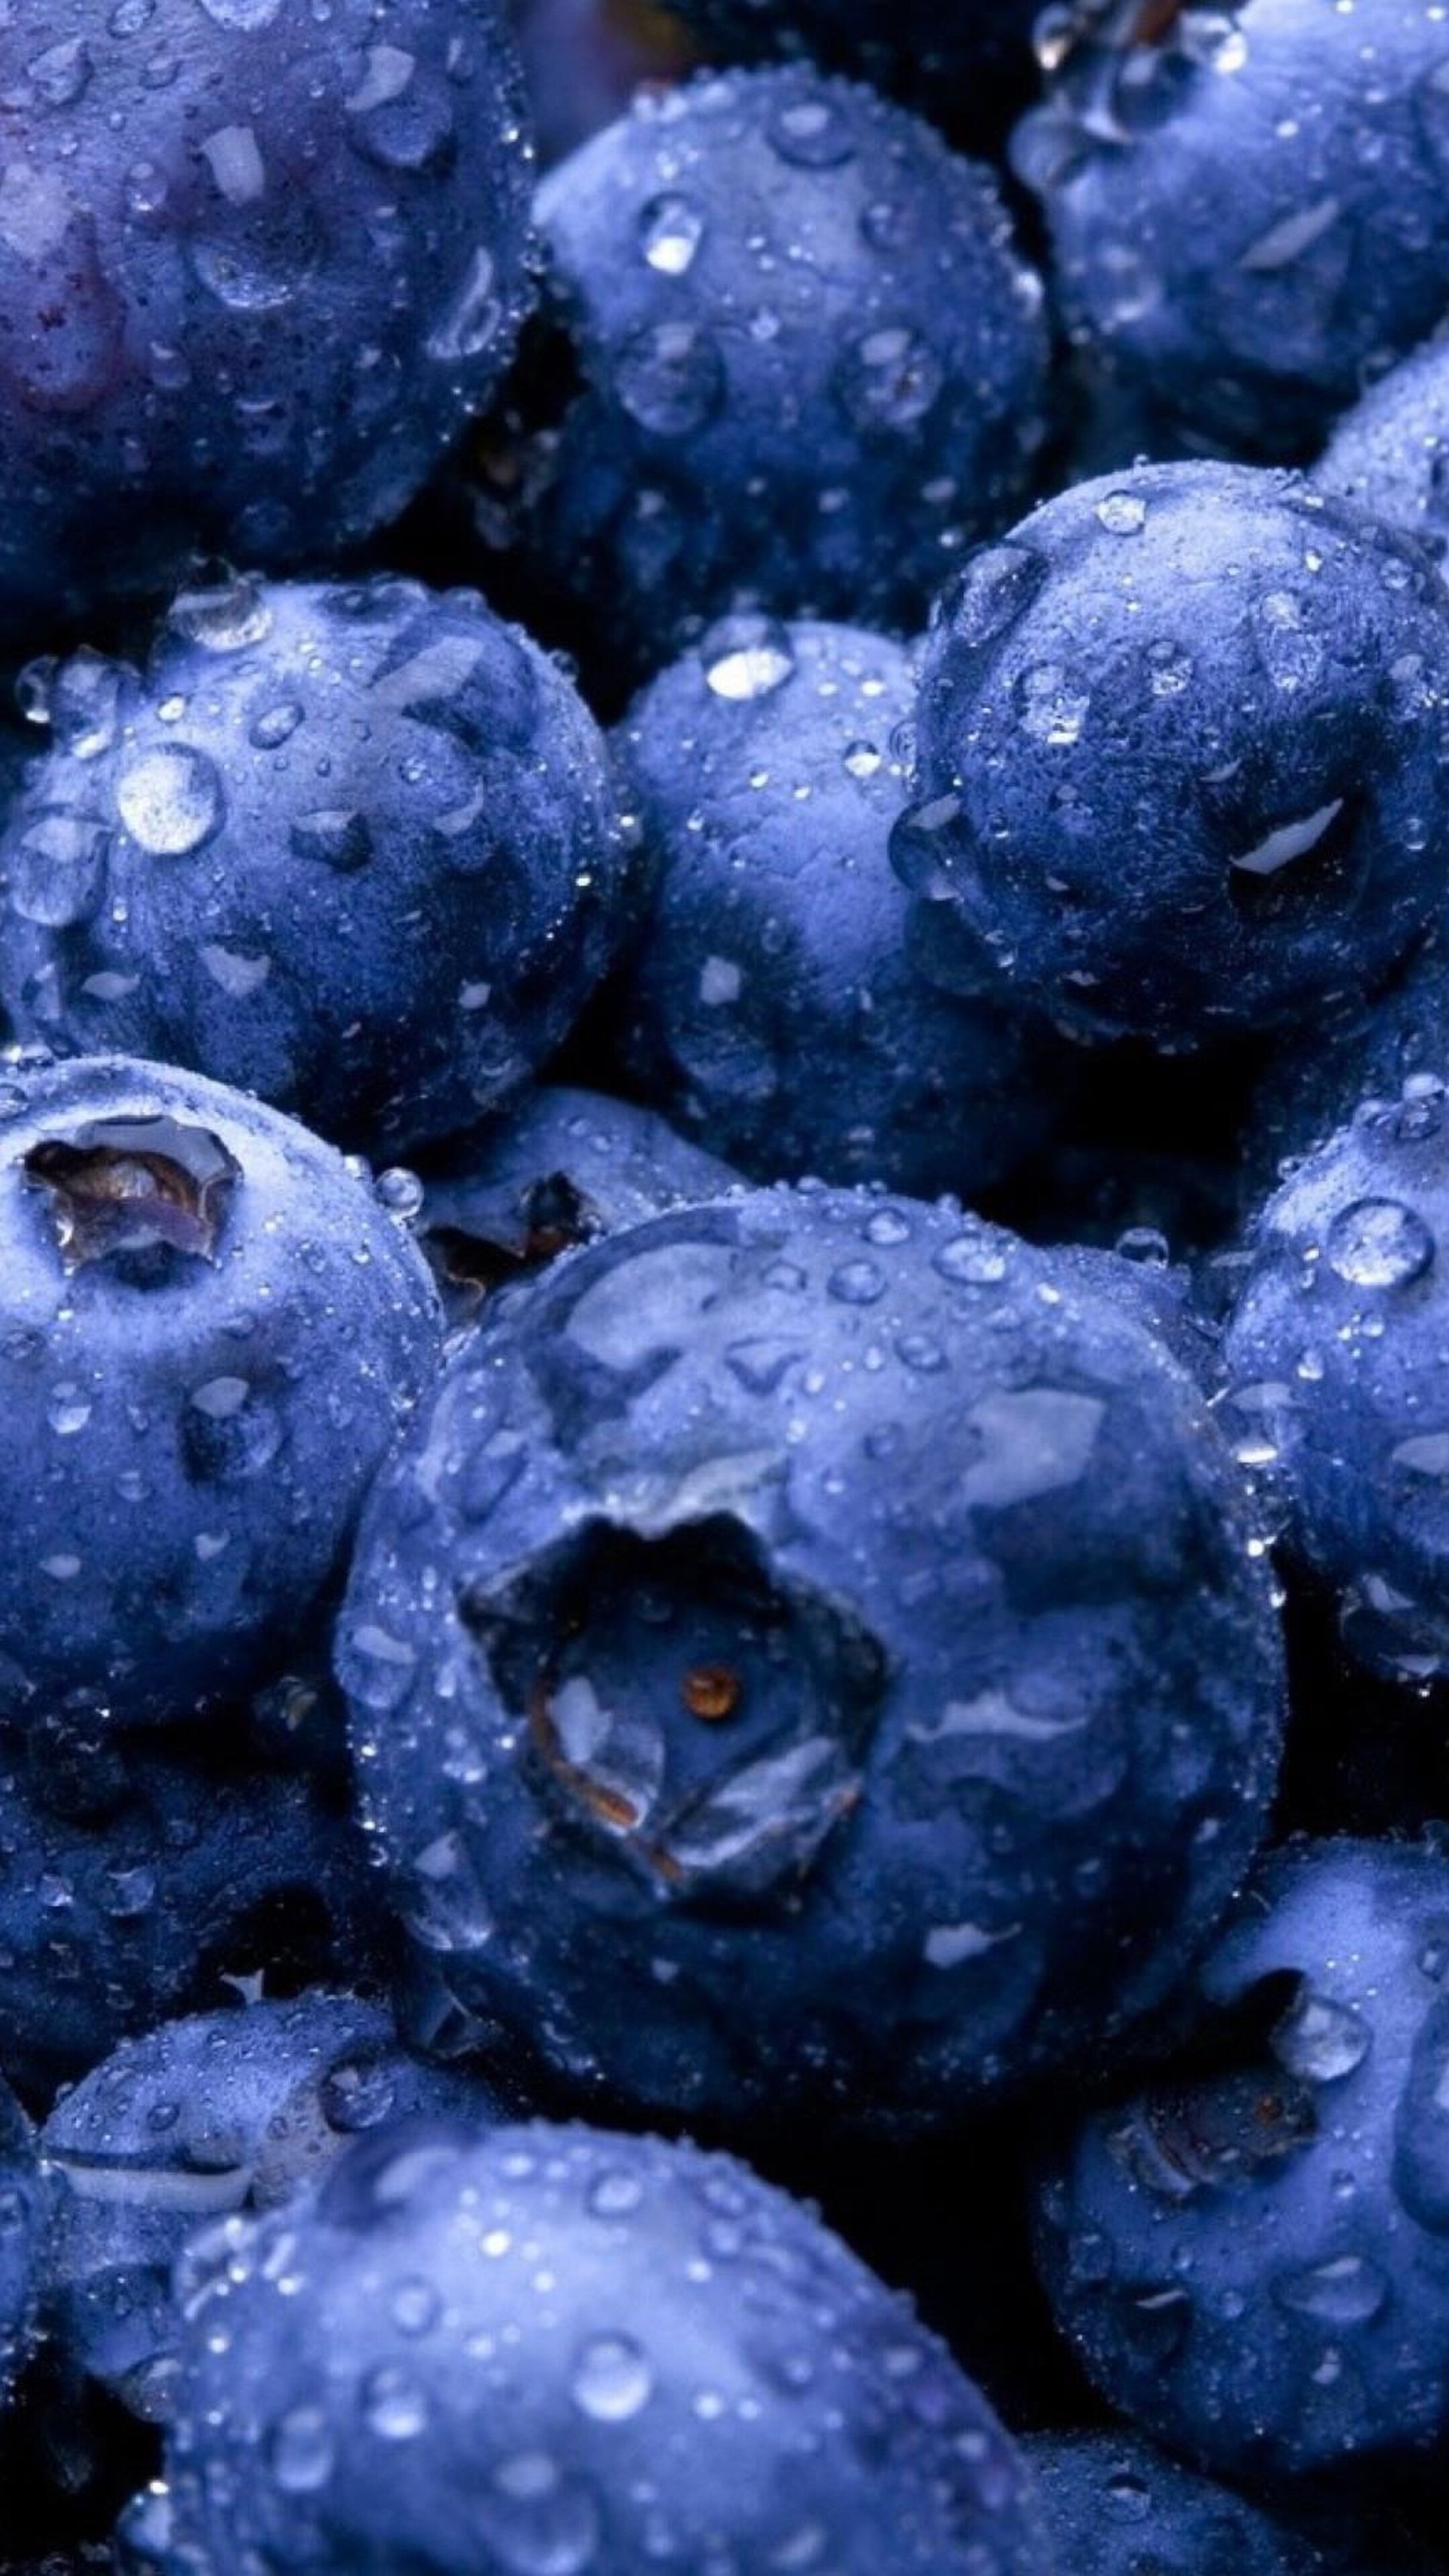 Sony Xperia blueberry wallpaper, Fruit-themed design, HD 4K image, Phone wallpaper excellence, 2160x3840 4K Handy